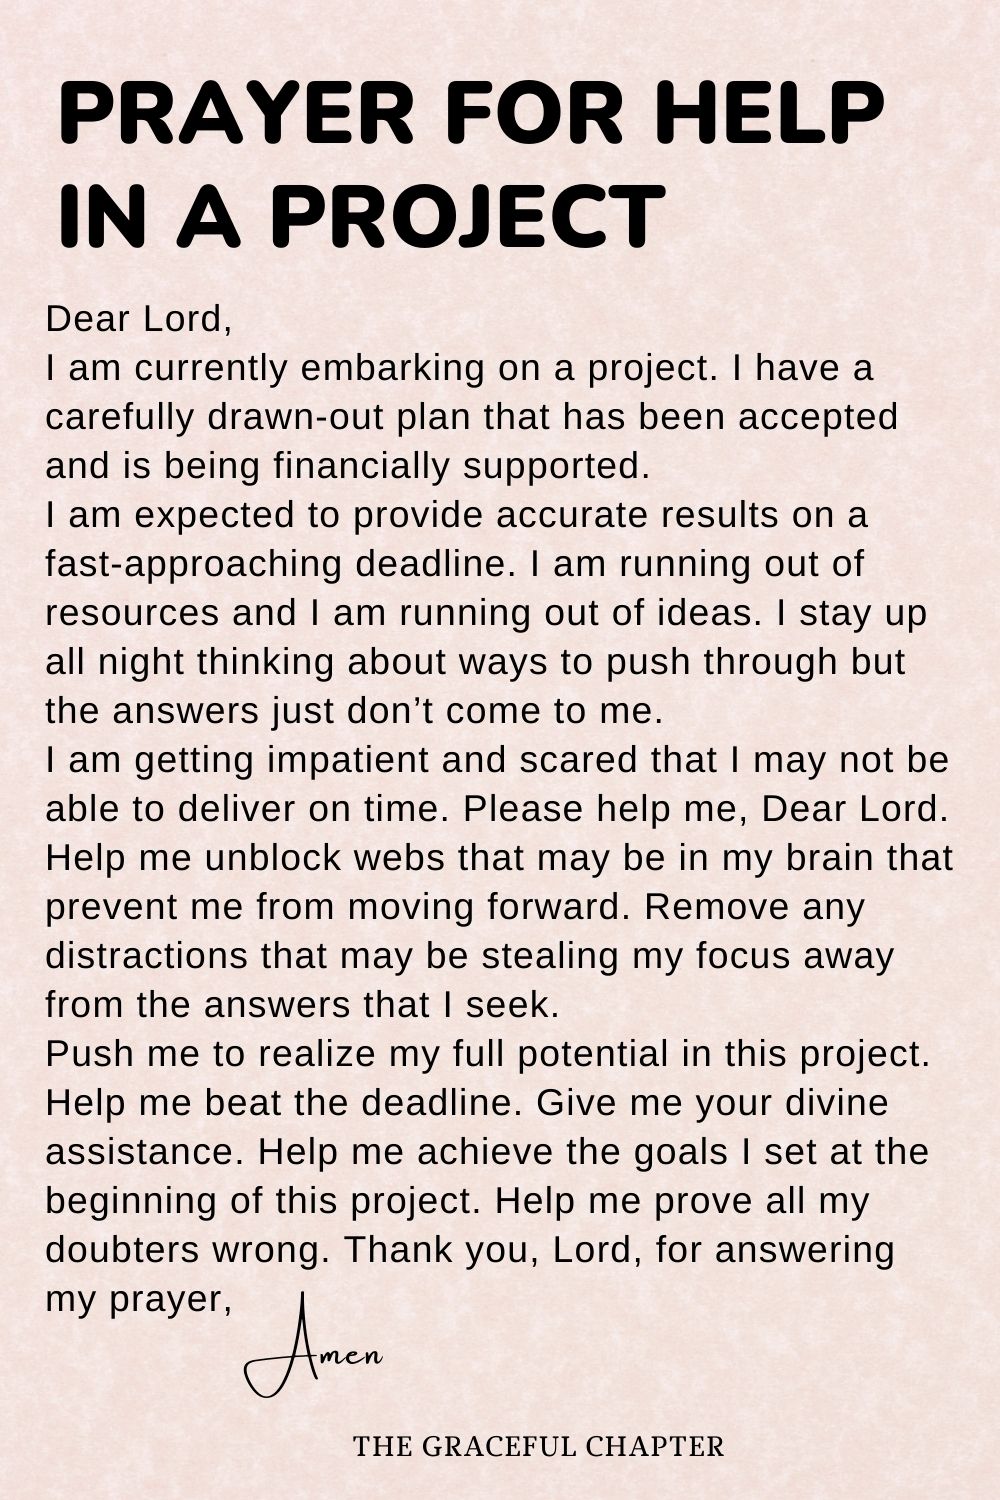 Prayer for help in a project